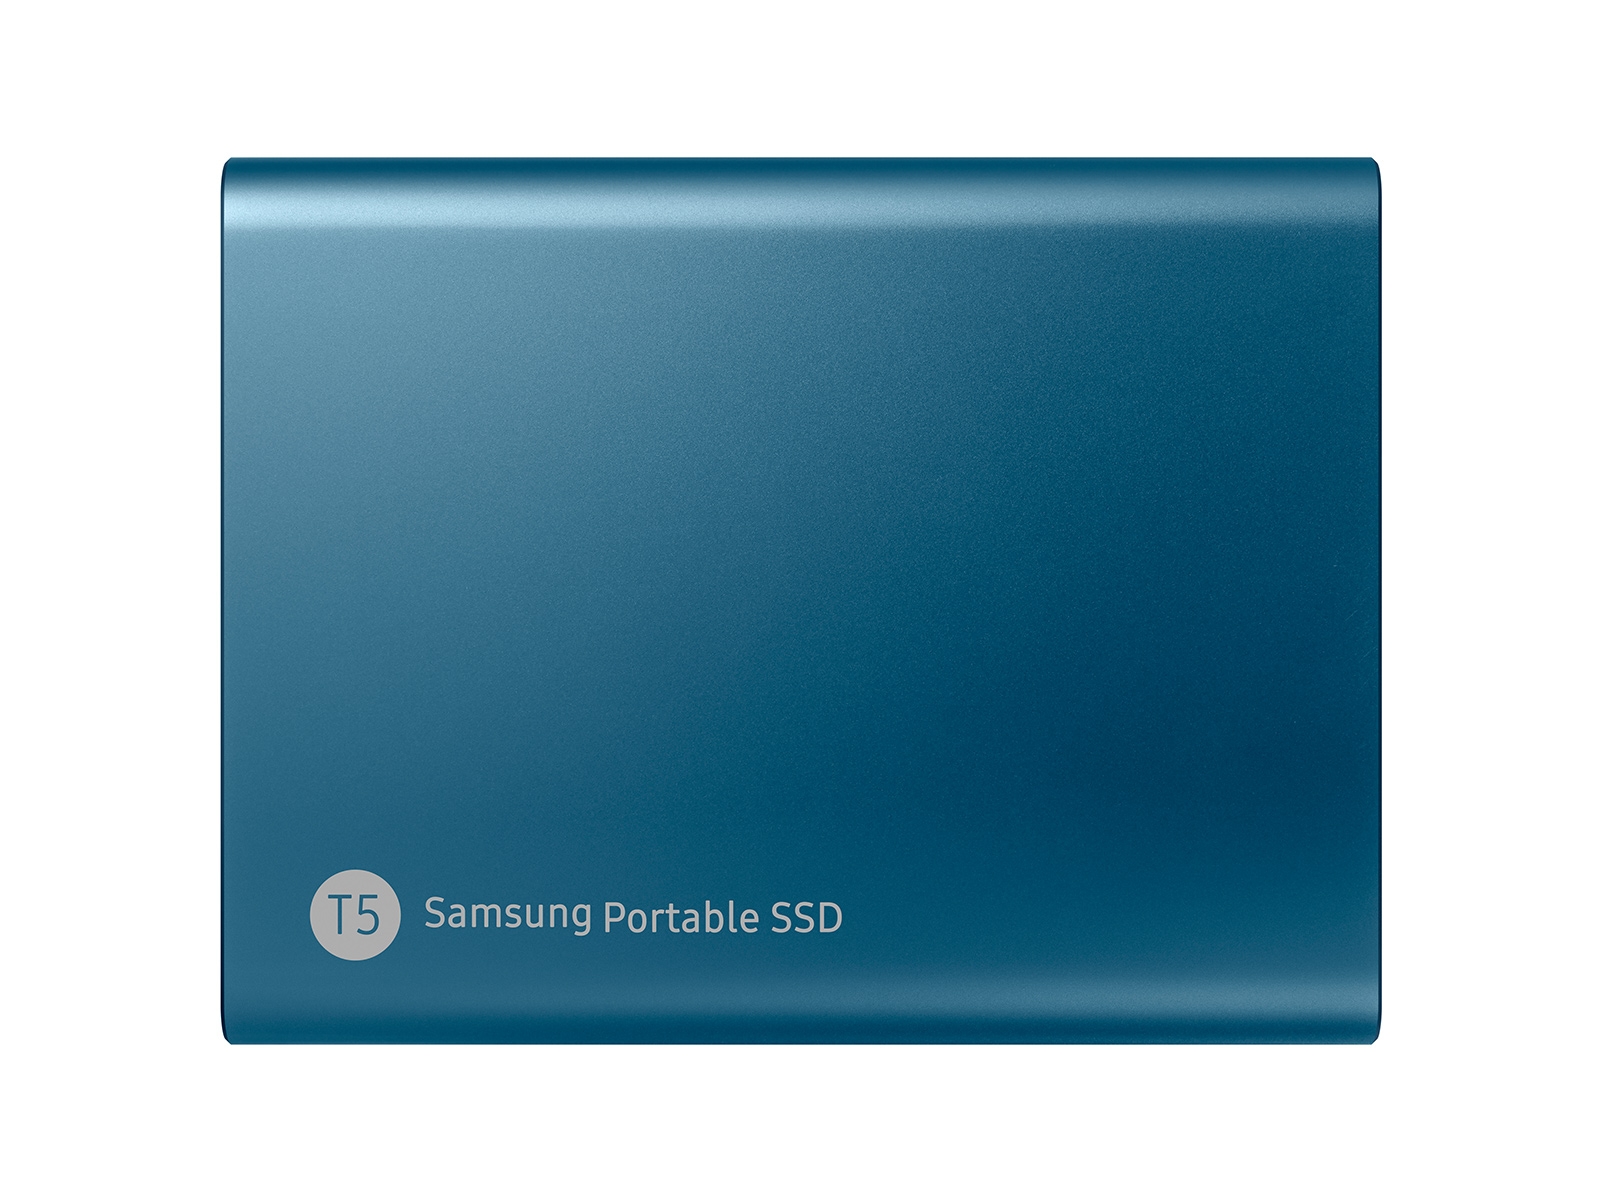 Written Instructions For Reformatting Samsung T5 Ssd For Mac